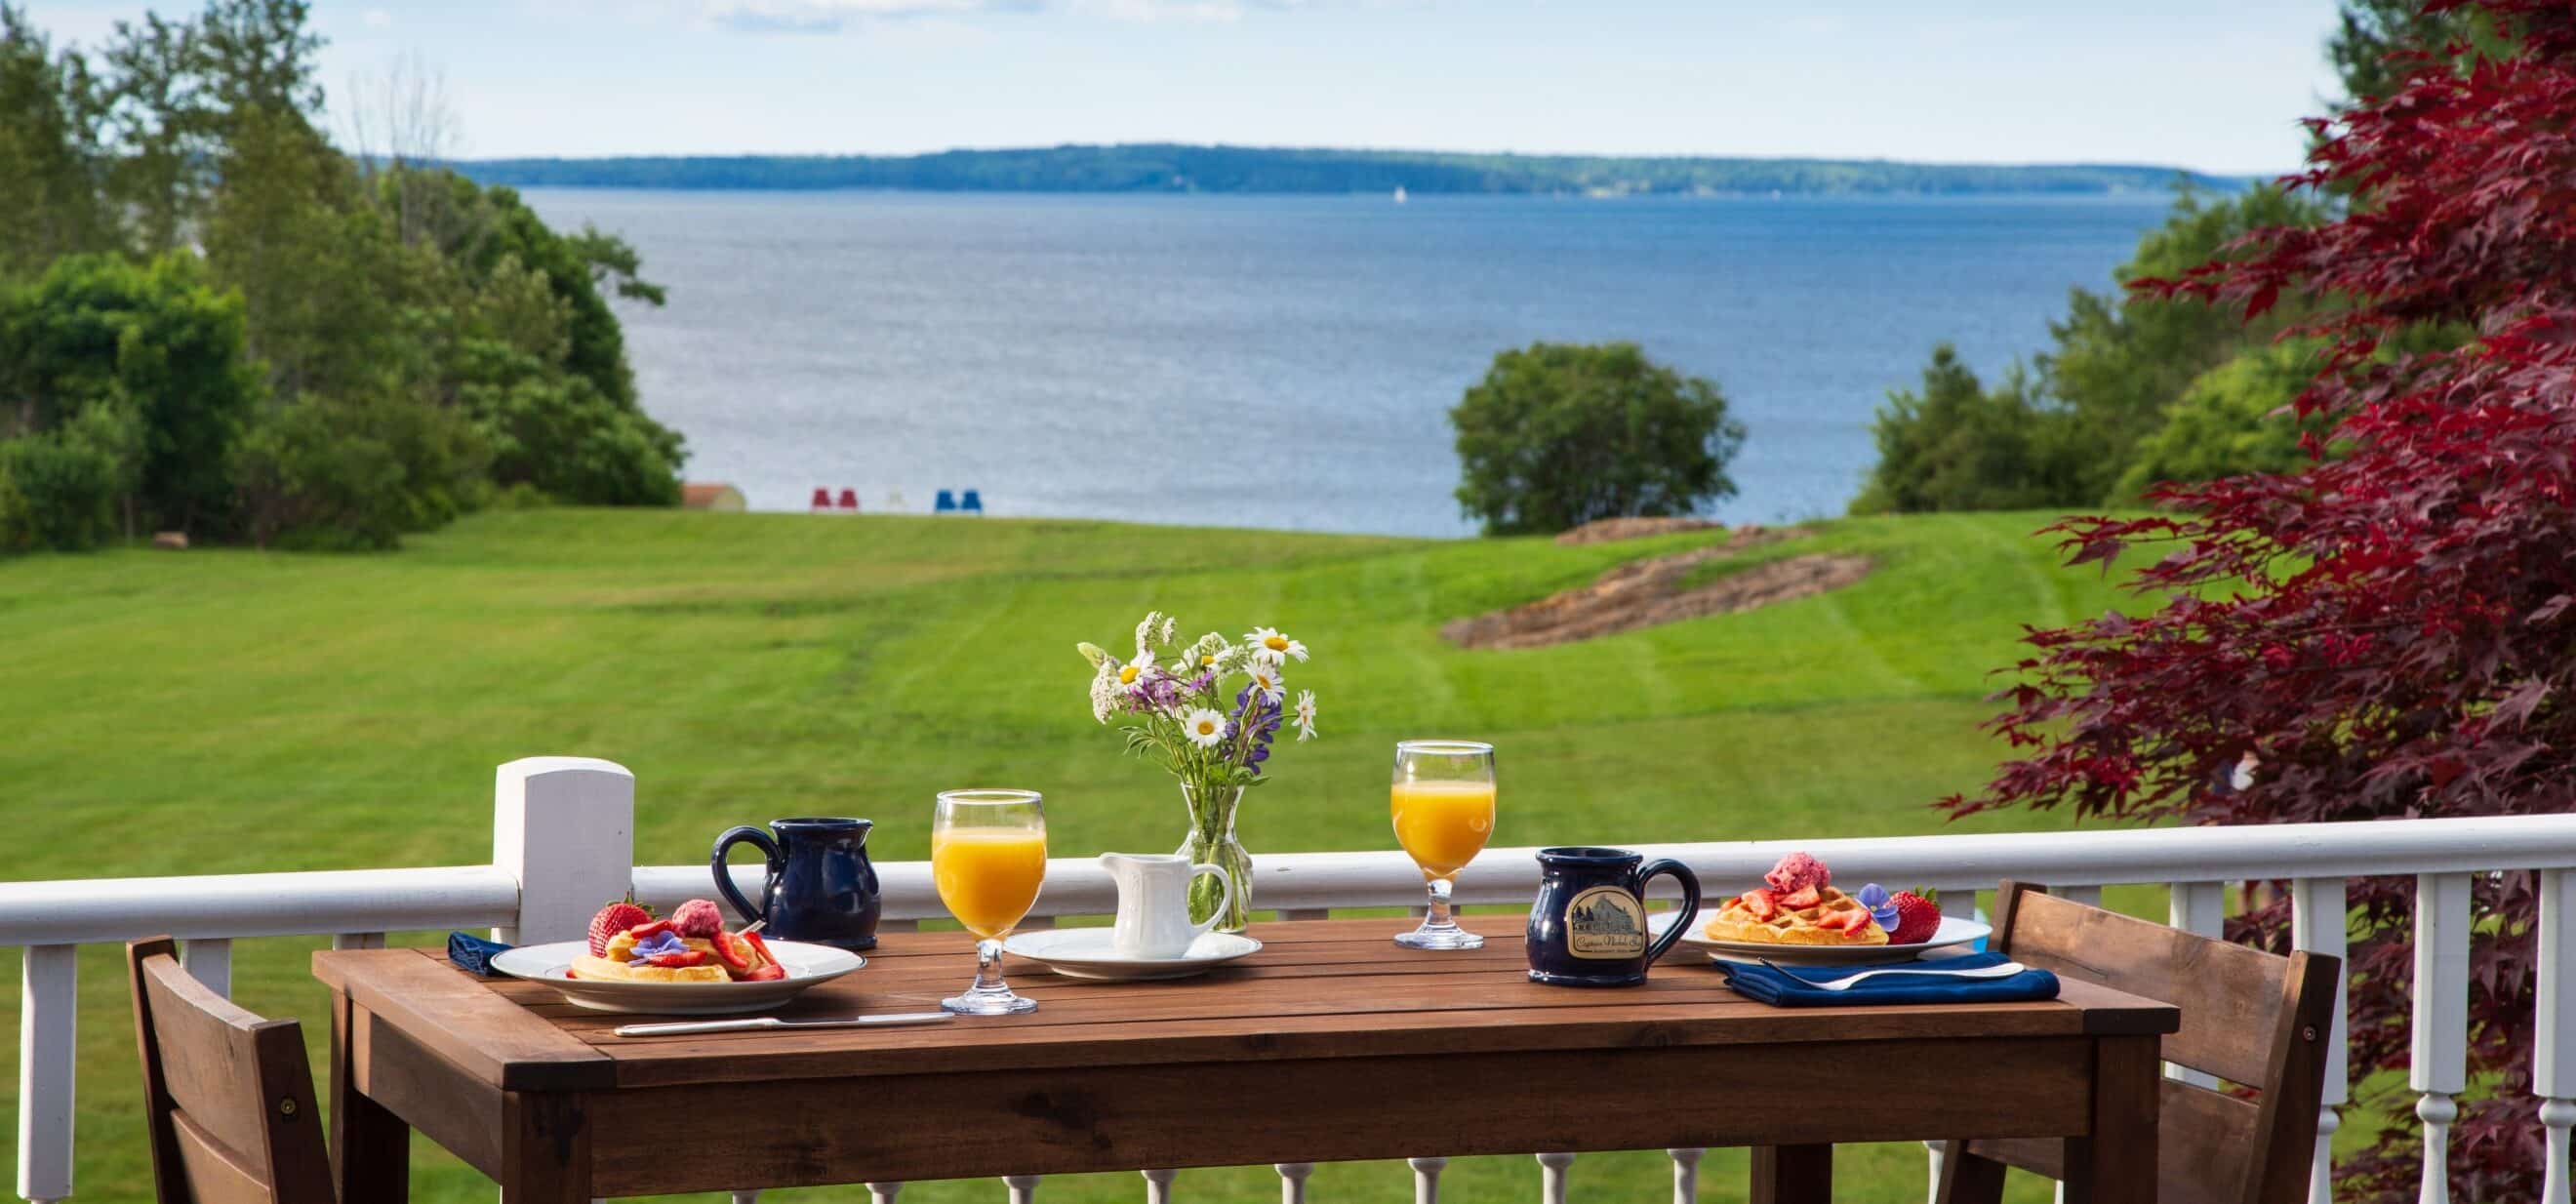 Spring breakfast set with views of the water and lawn